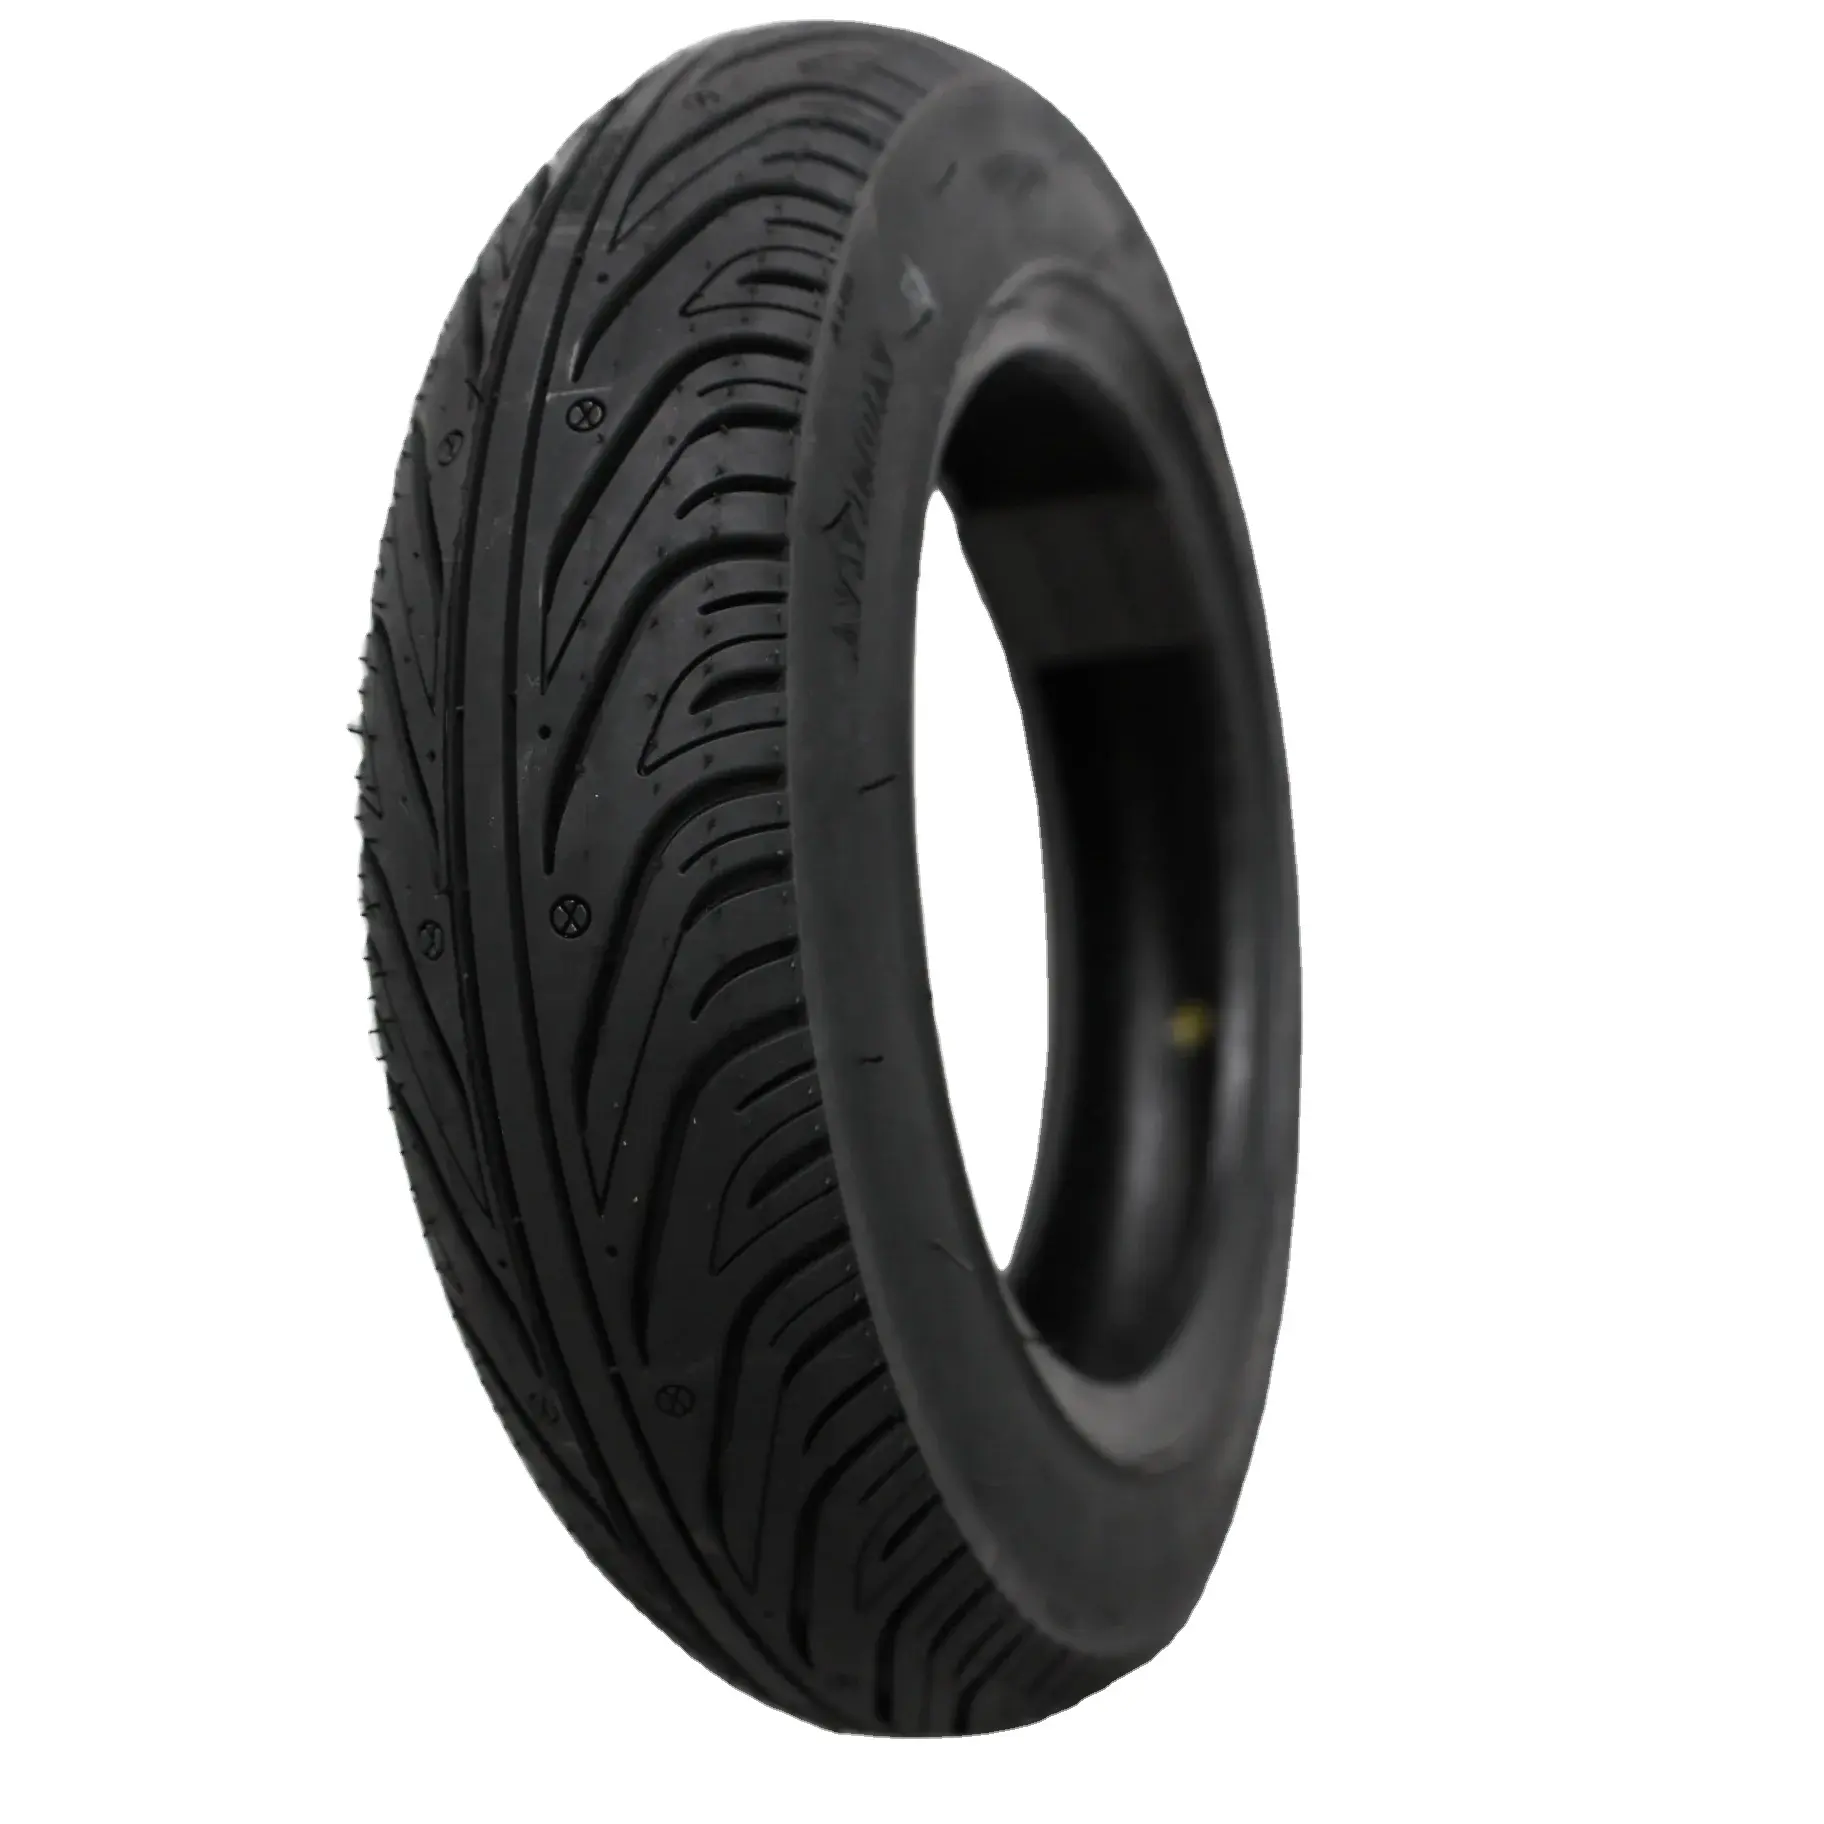 Tunisia Motorcycle Tyre 130/90-10 TL China motorcycle tyre factory Nylon Size Motorcycle